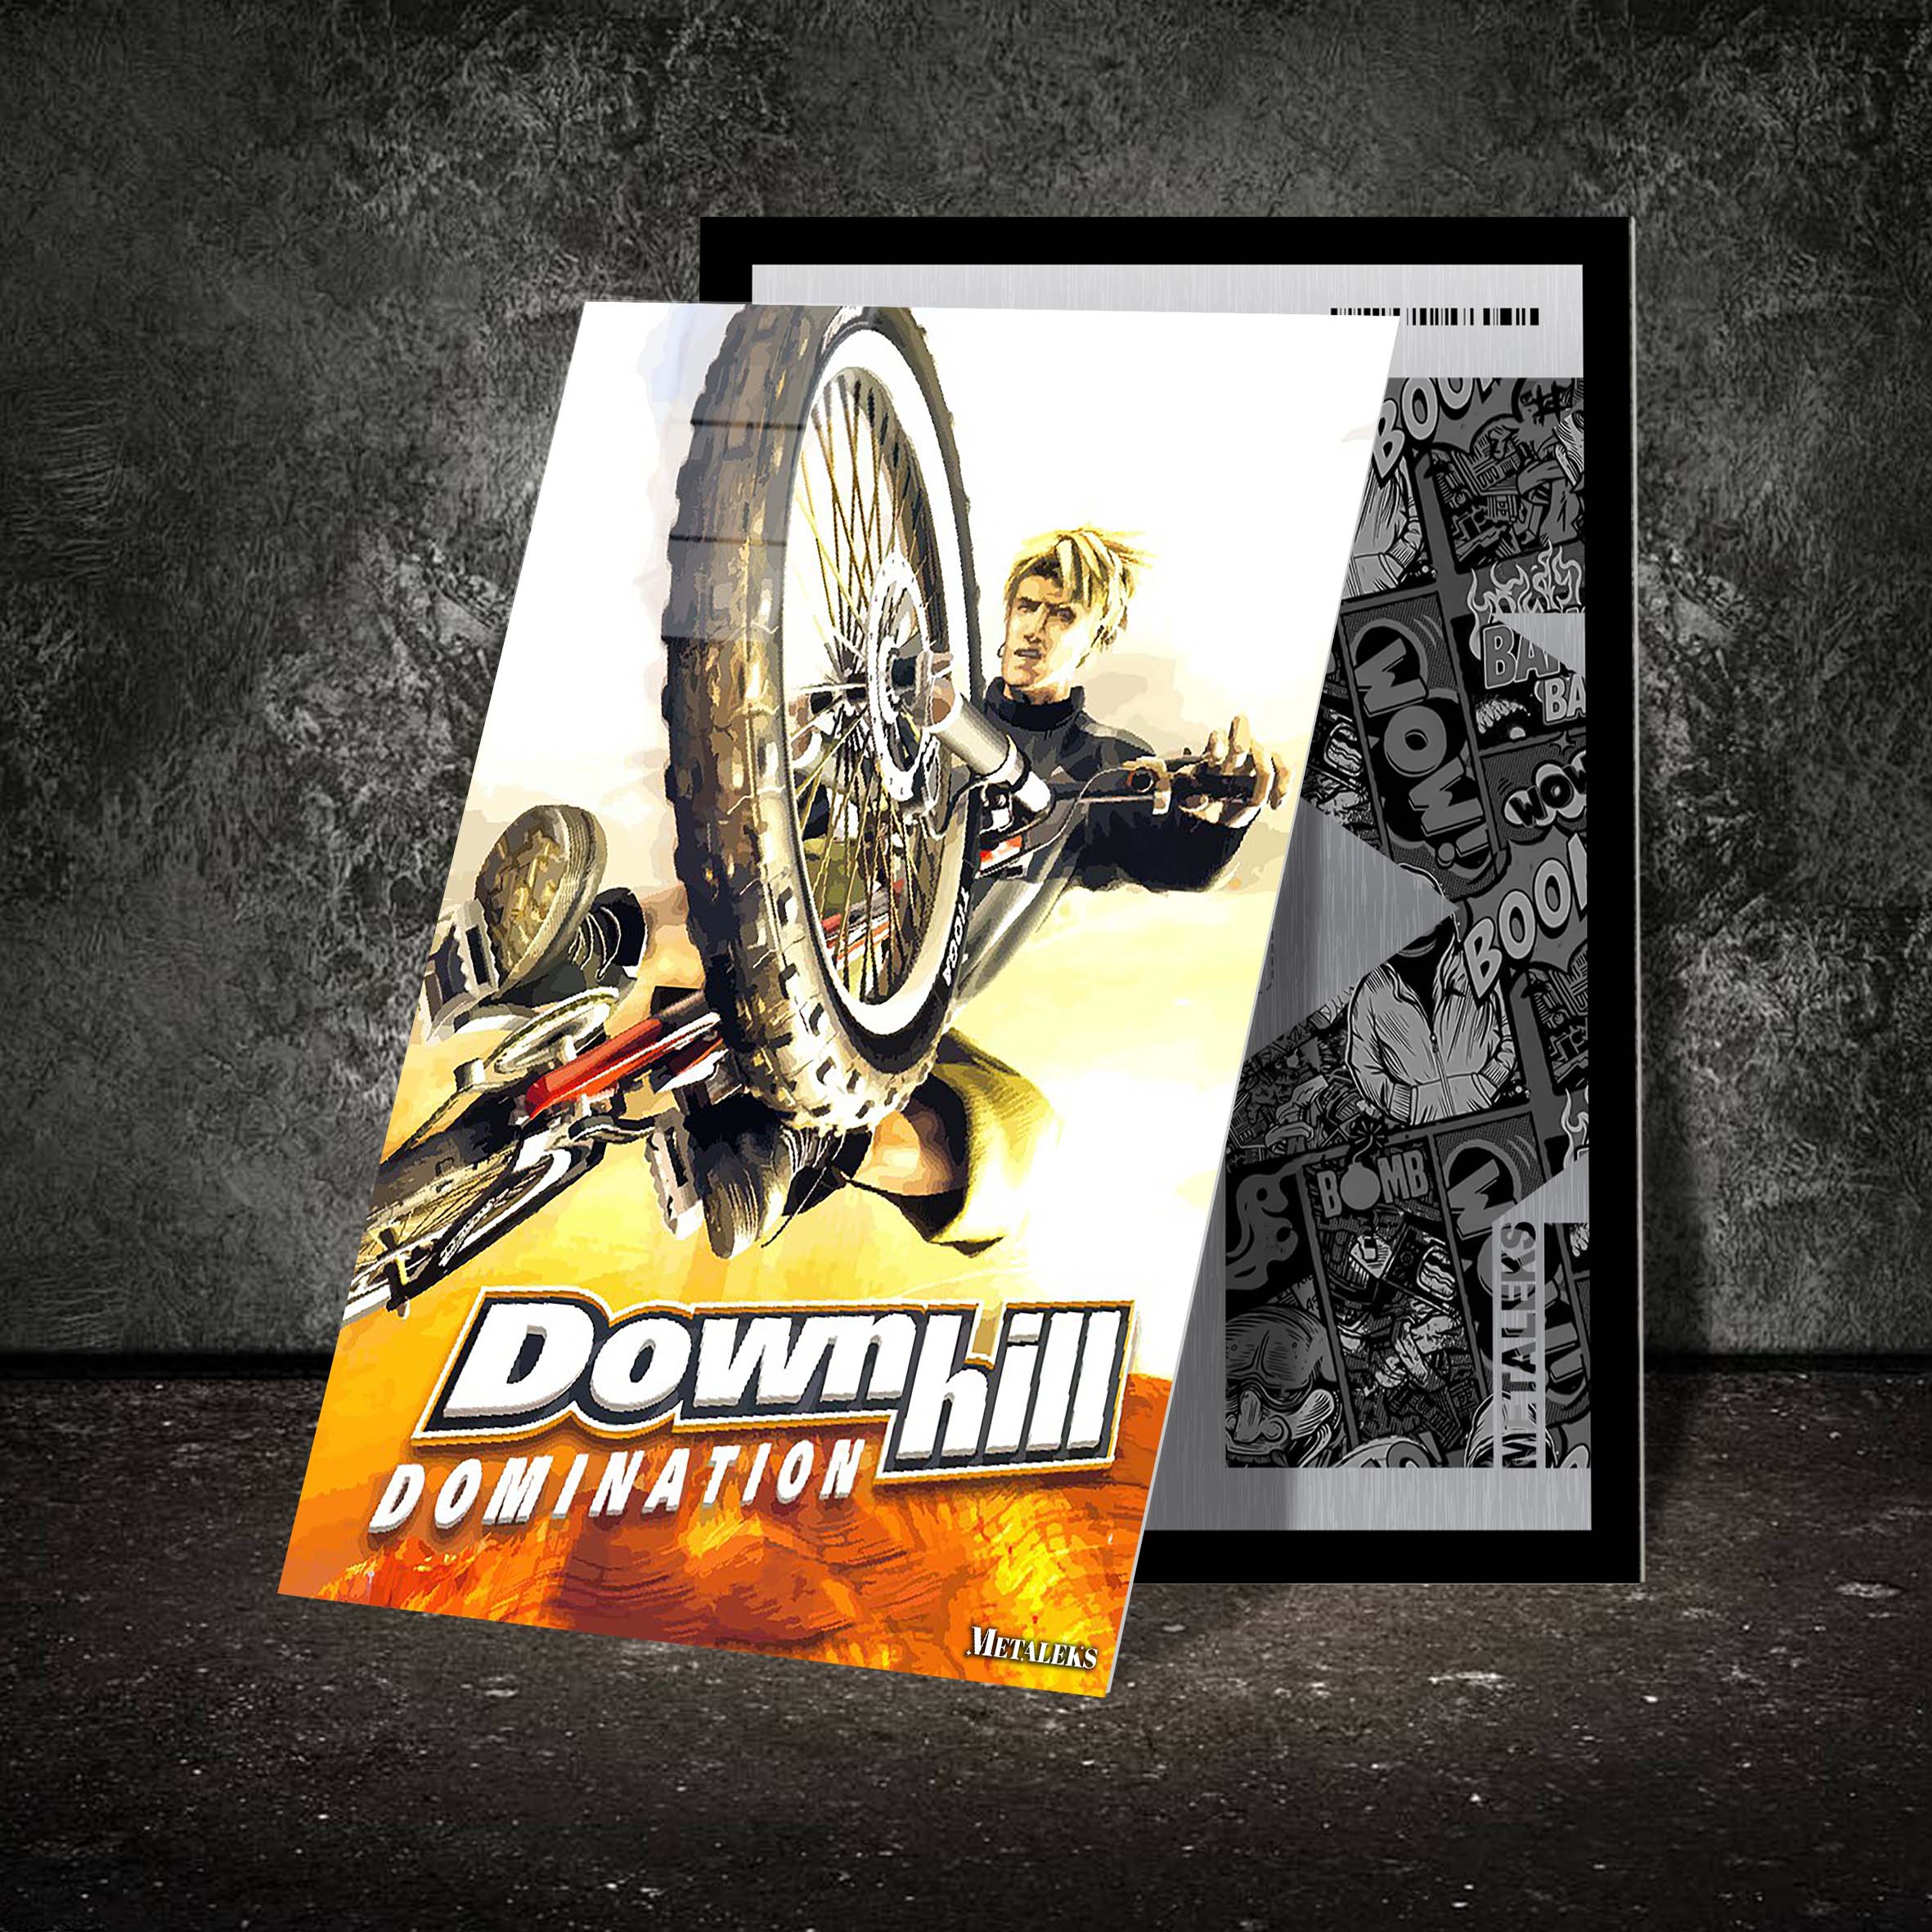 Downhill Domination-designed by @HLLM